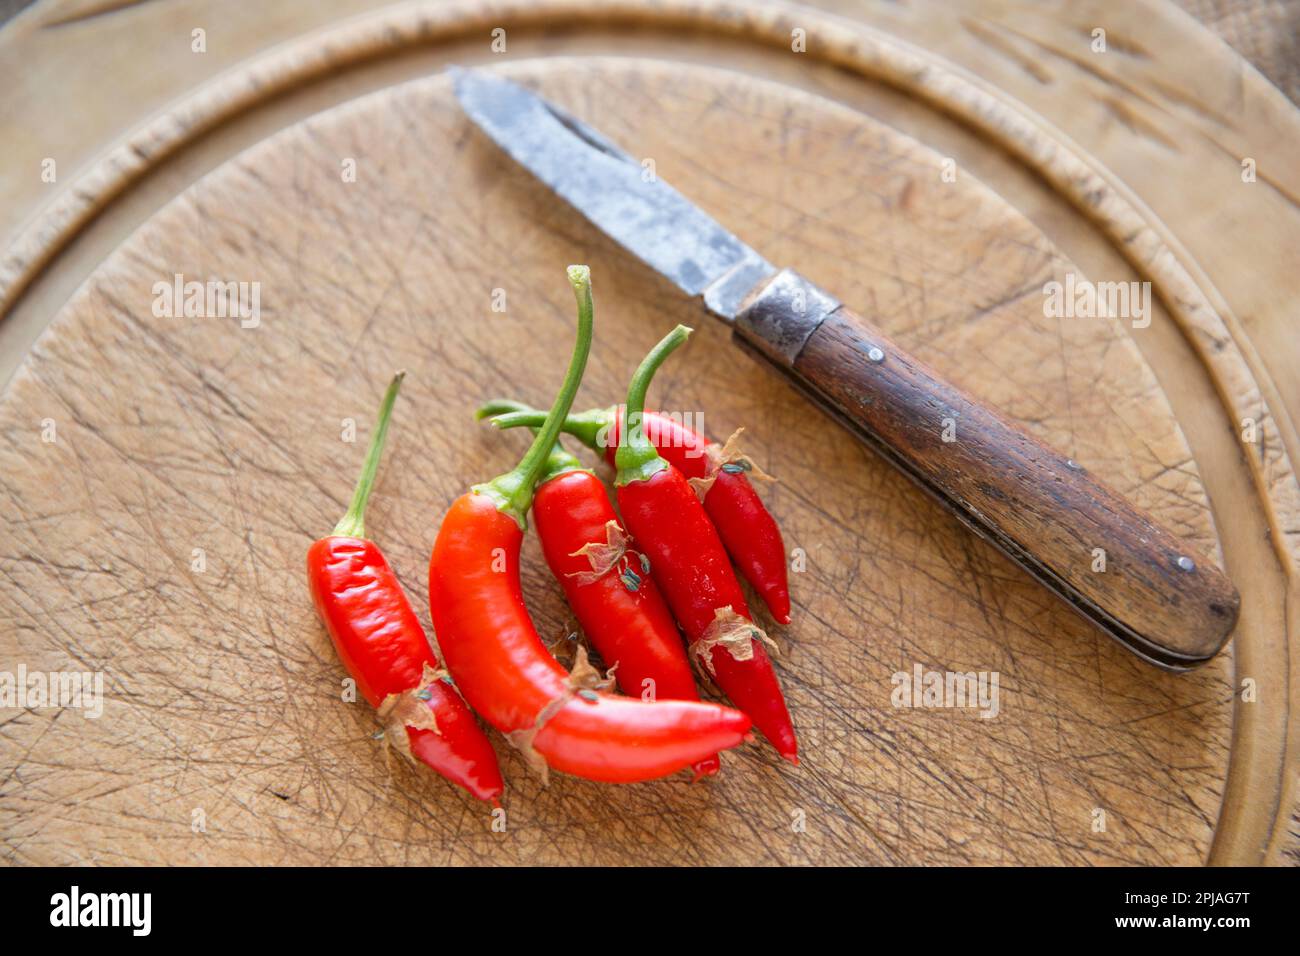 Home grown red chillies next to an old penknife resting on a wooden chopping board. England UK GB Stock Photo